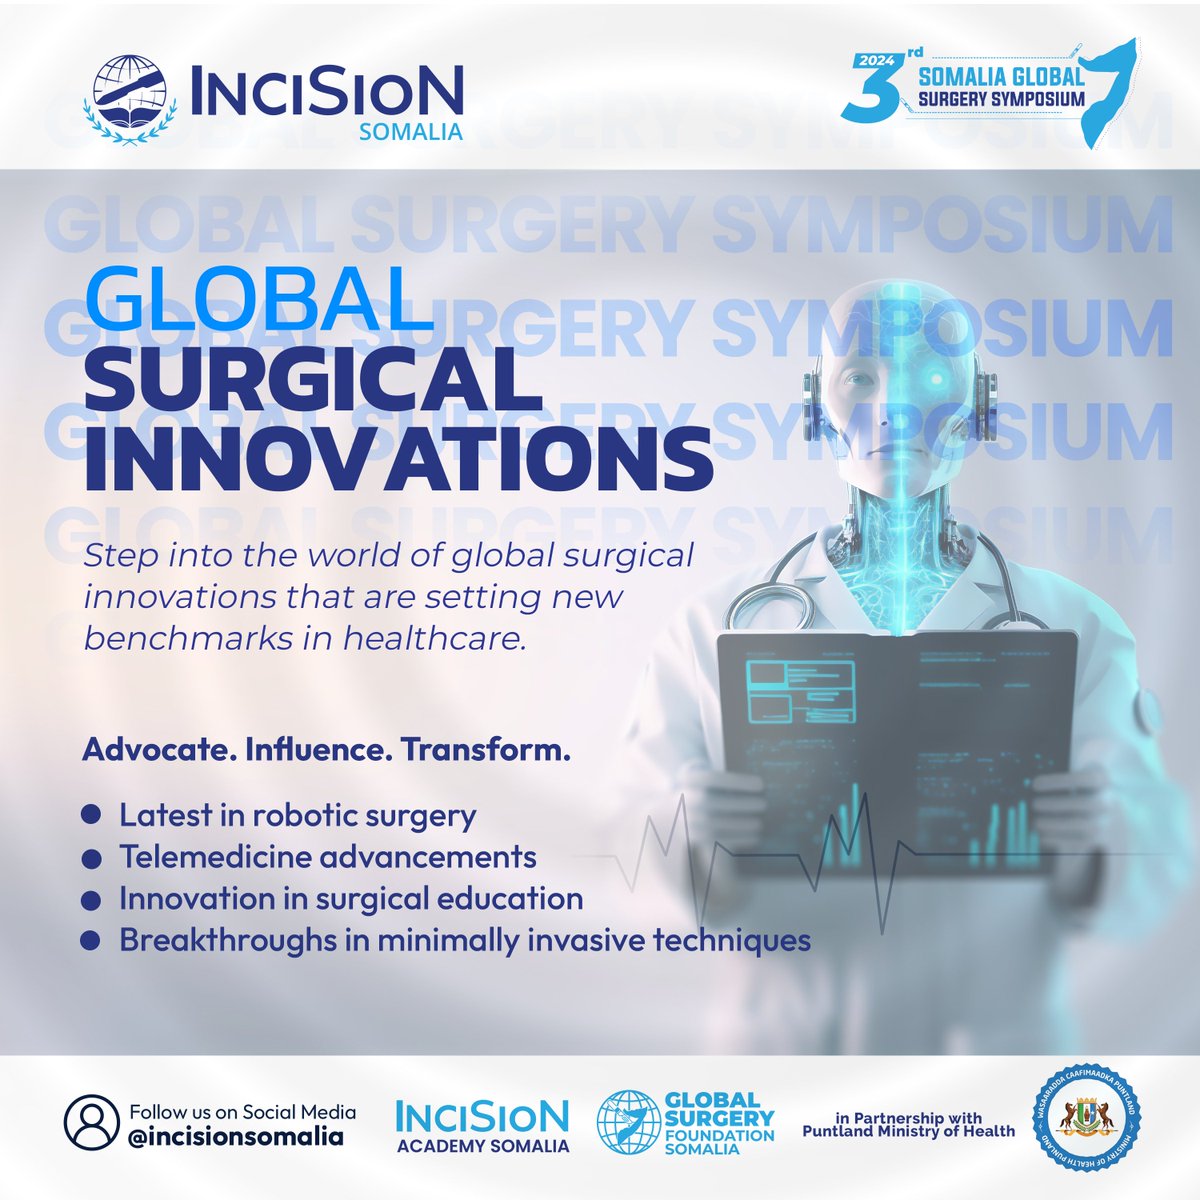 Step into the world of global #surgicalinnovations that are setting new benchmarks in healthcare.
Explore the Latest in #roboticsurgery ,#Telemedicine advancements, #Innovation in #surgicaleducation,
Breakthroughs in minimally invasive techniques and moire.